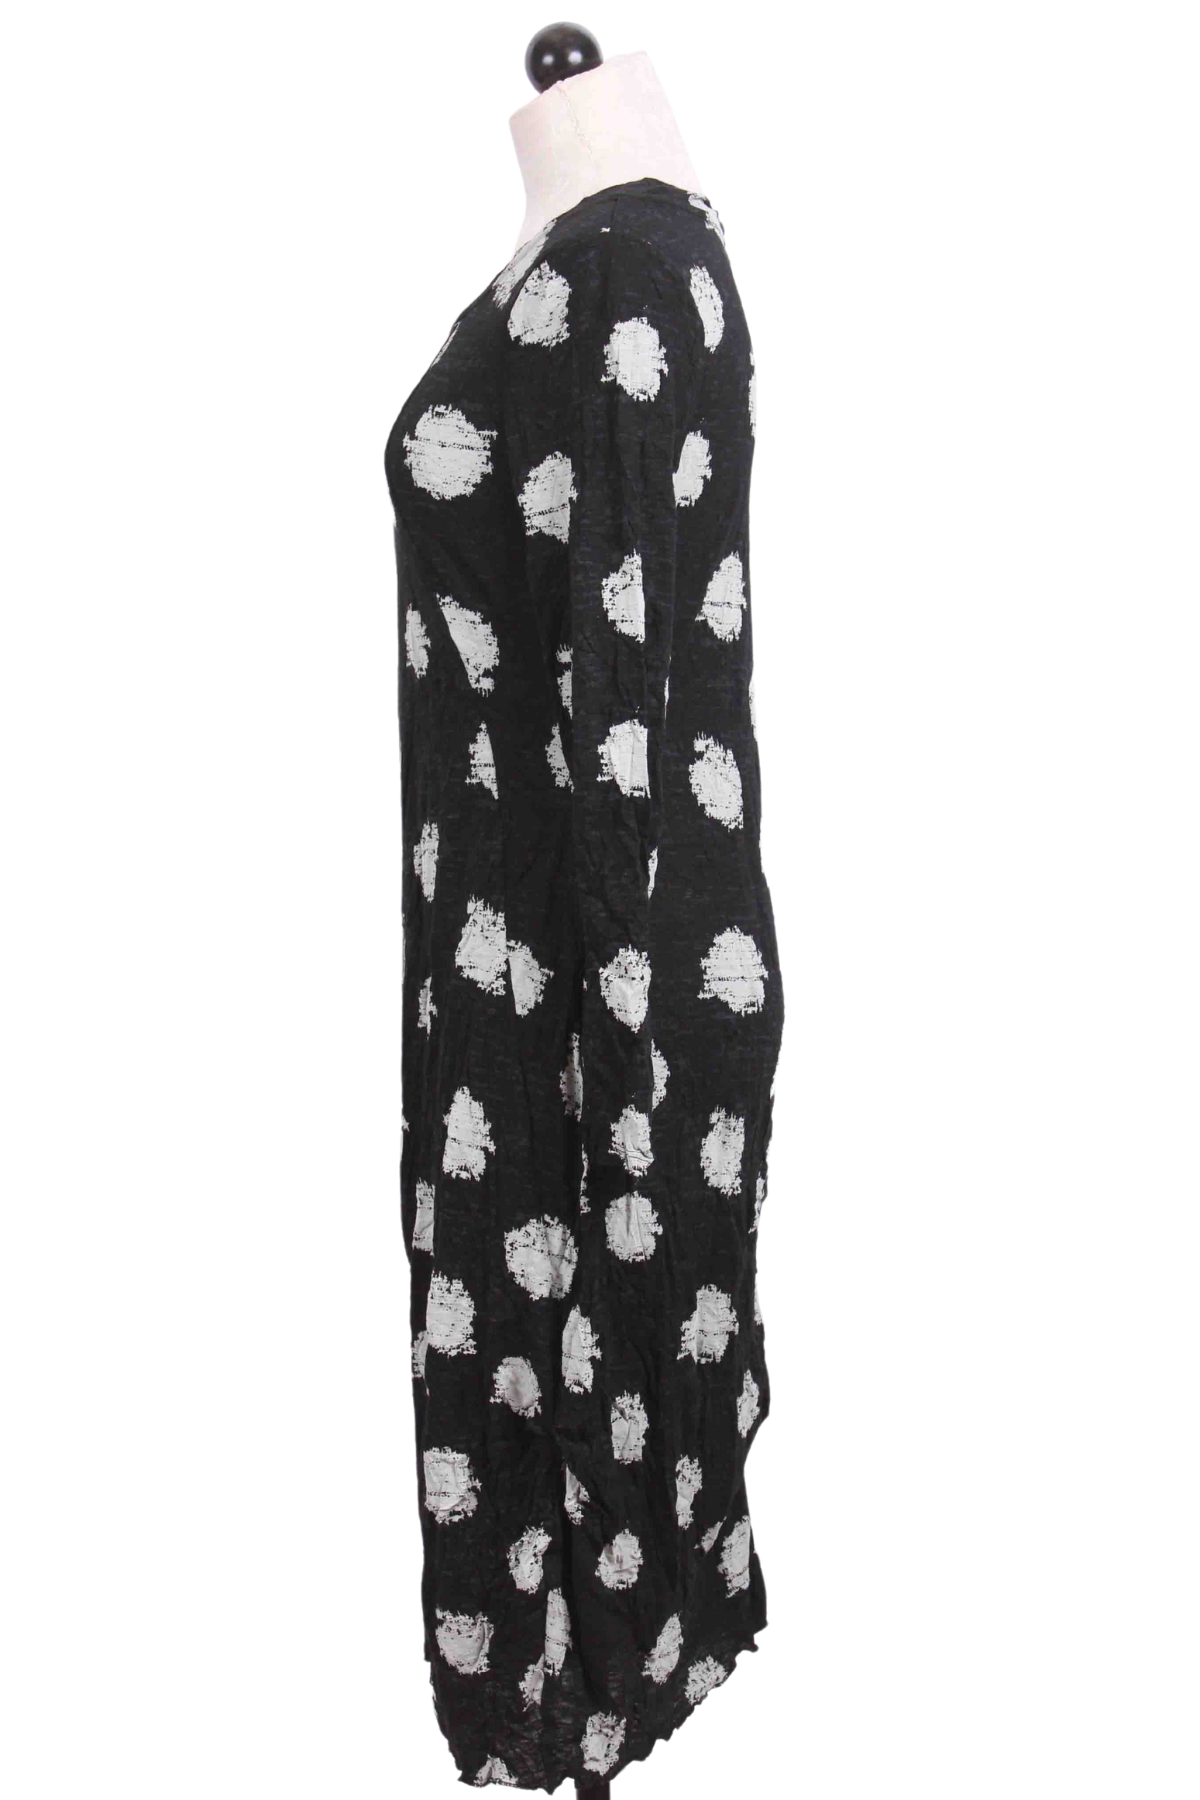 side view of Black and white Polka Dot Jetset Crinkle Anytime Dress by Liv by Habitat